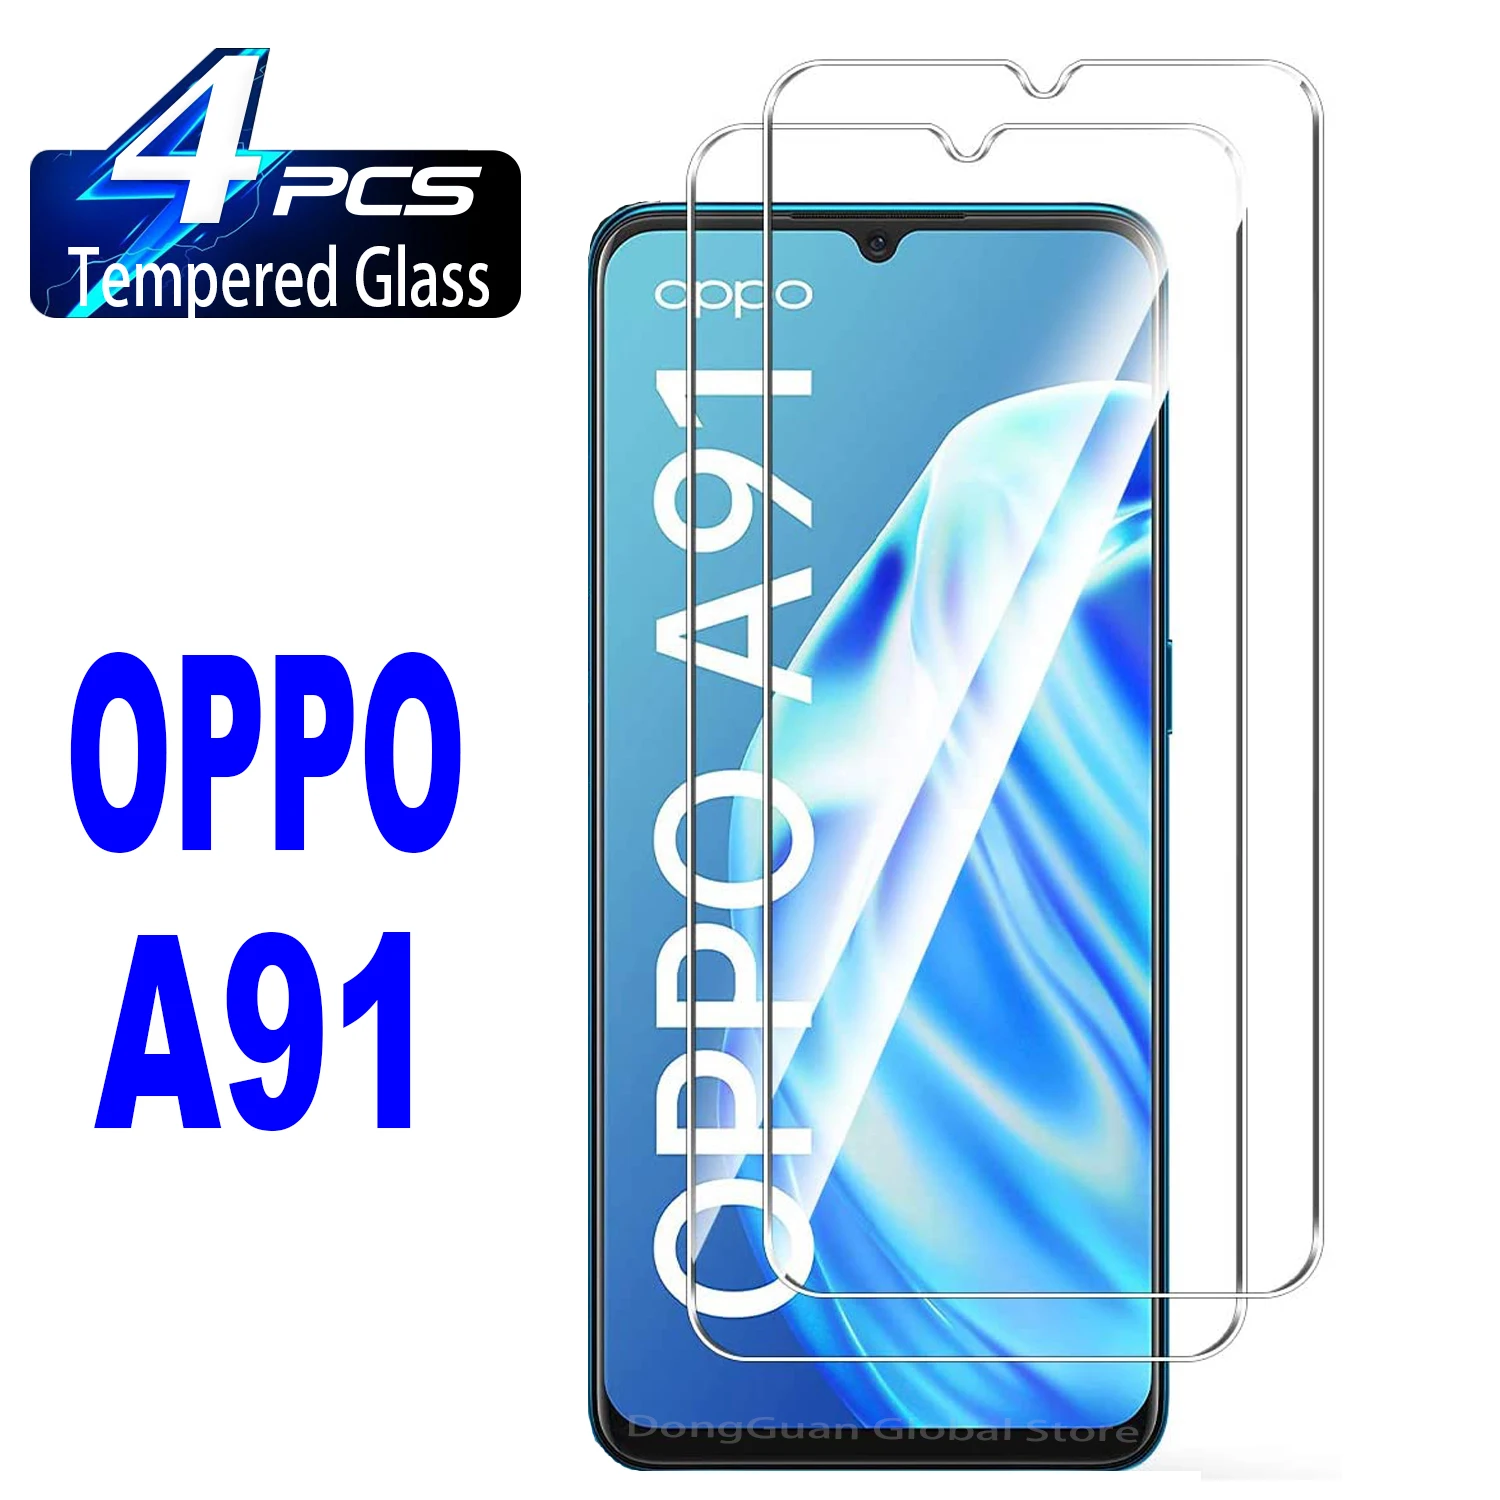 2/4Pcs Tempered Glass For OPPO A91 Screen Protector Glass Film hydrogel film for oppo reno 2 z f screen protector for oppo reno z 2z 2 2f ace screen protector oppo reno ace 2f 2z cover film